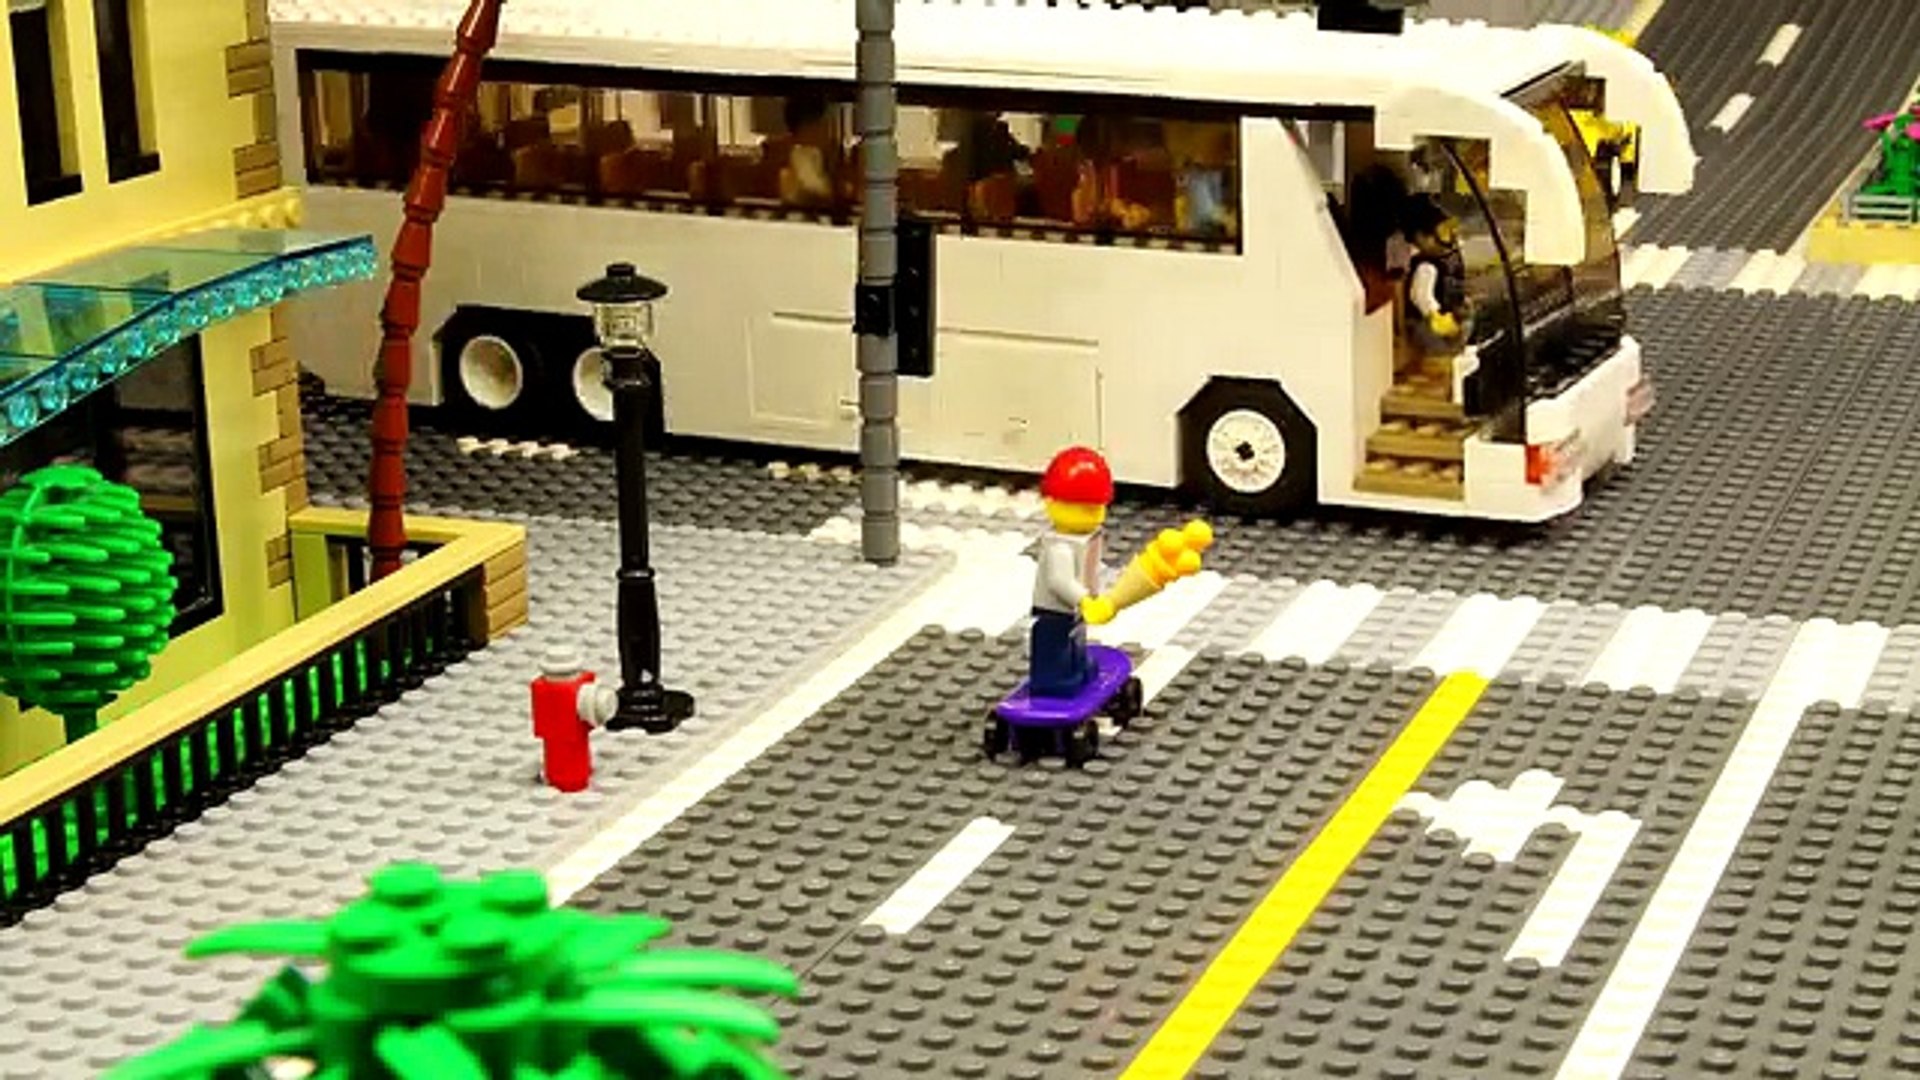 lego coach bus for Sale OFF 78%